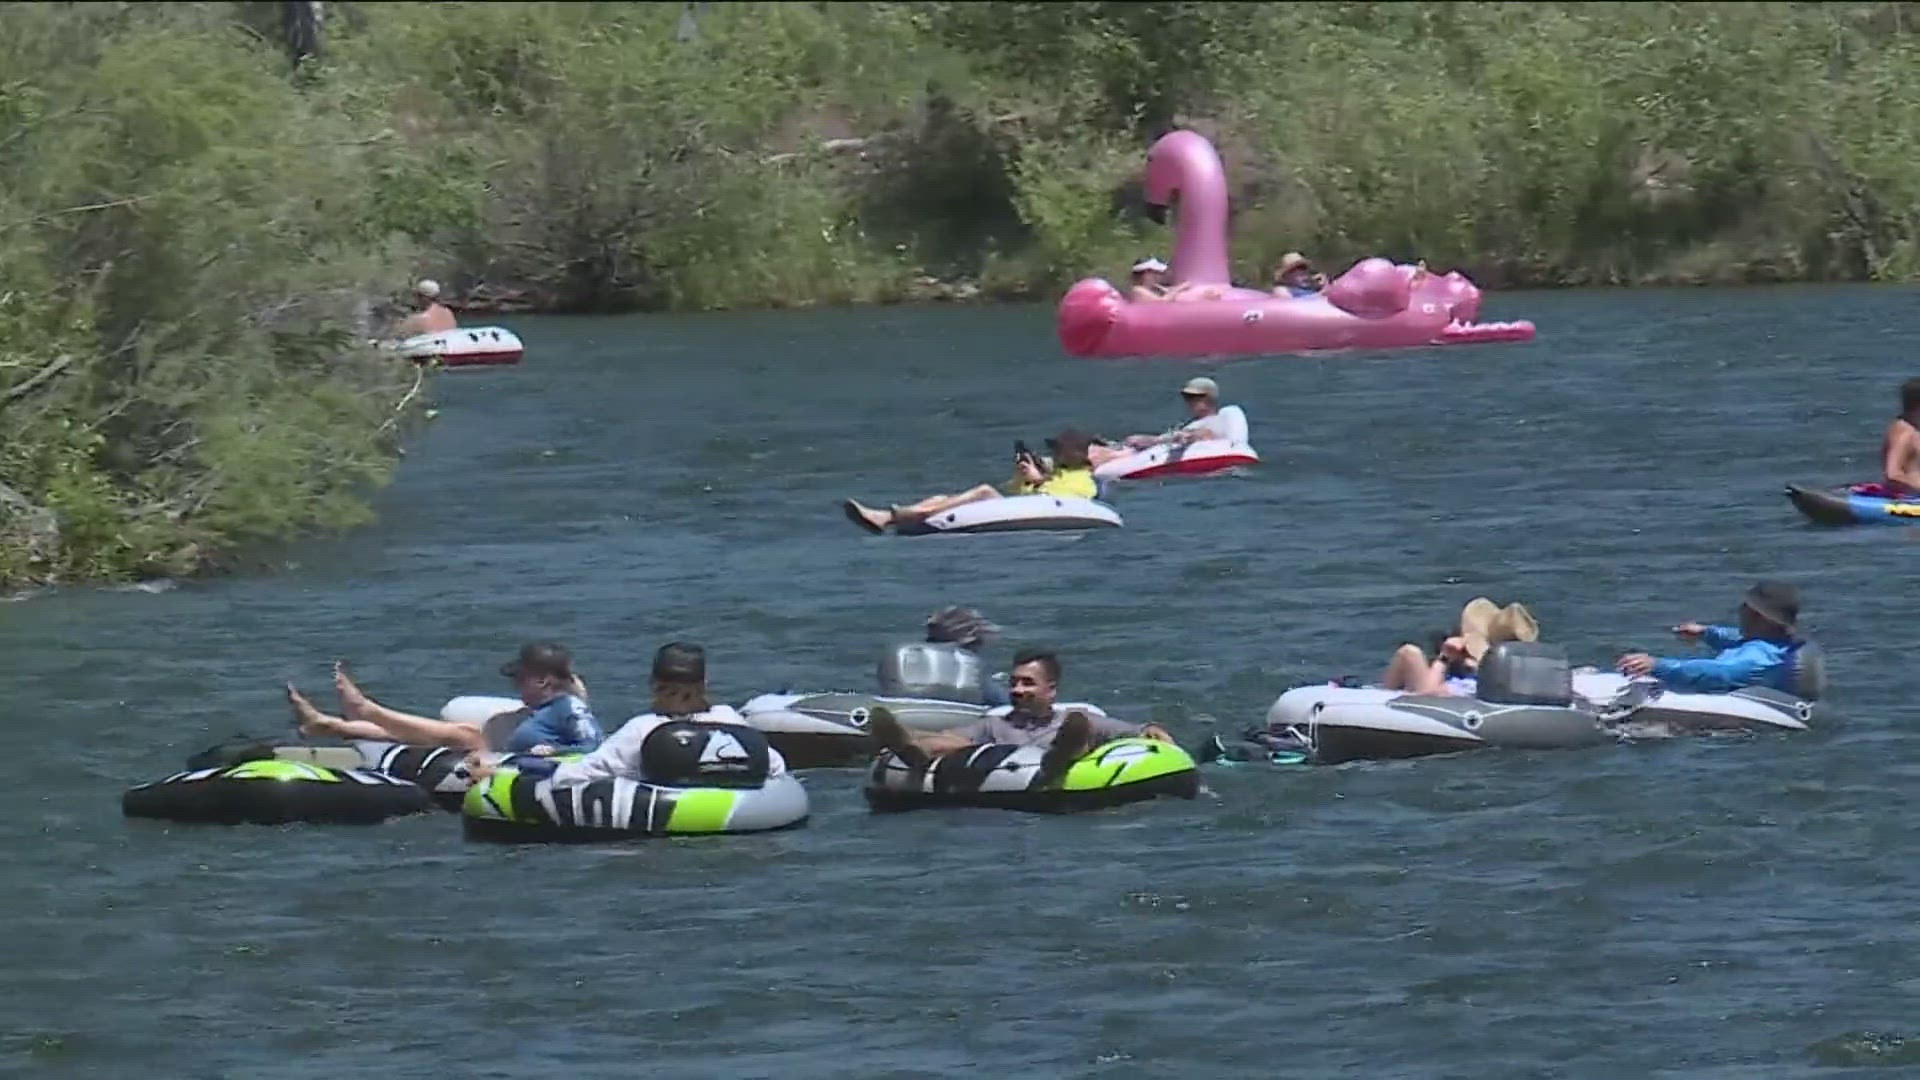 Officials say the Boise River floating season may arrive just in time for the official start of summer (June 20) but only if all necessary conditions are met.